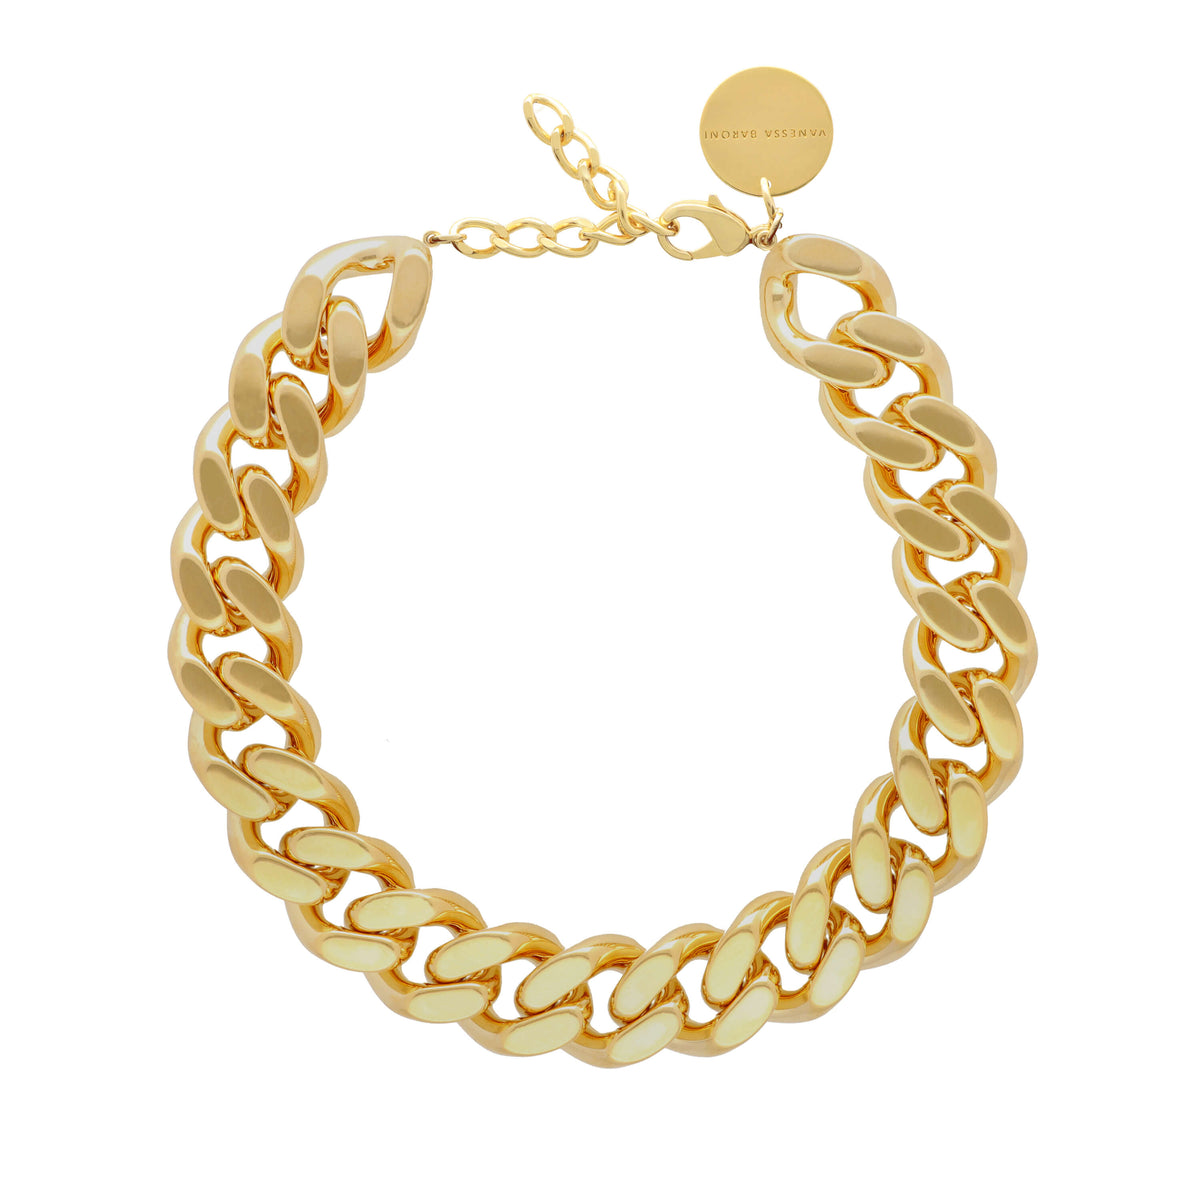 Flat Chain Necklace Gold